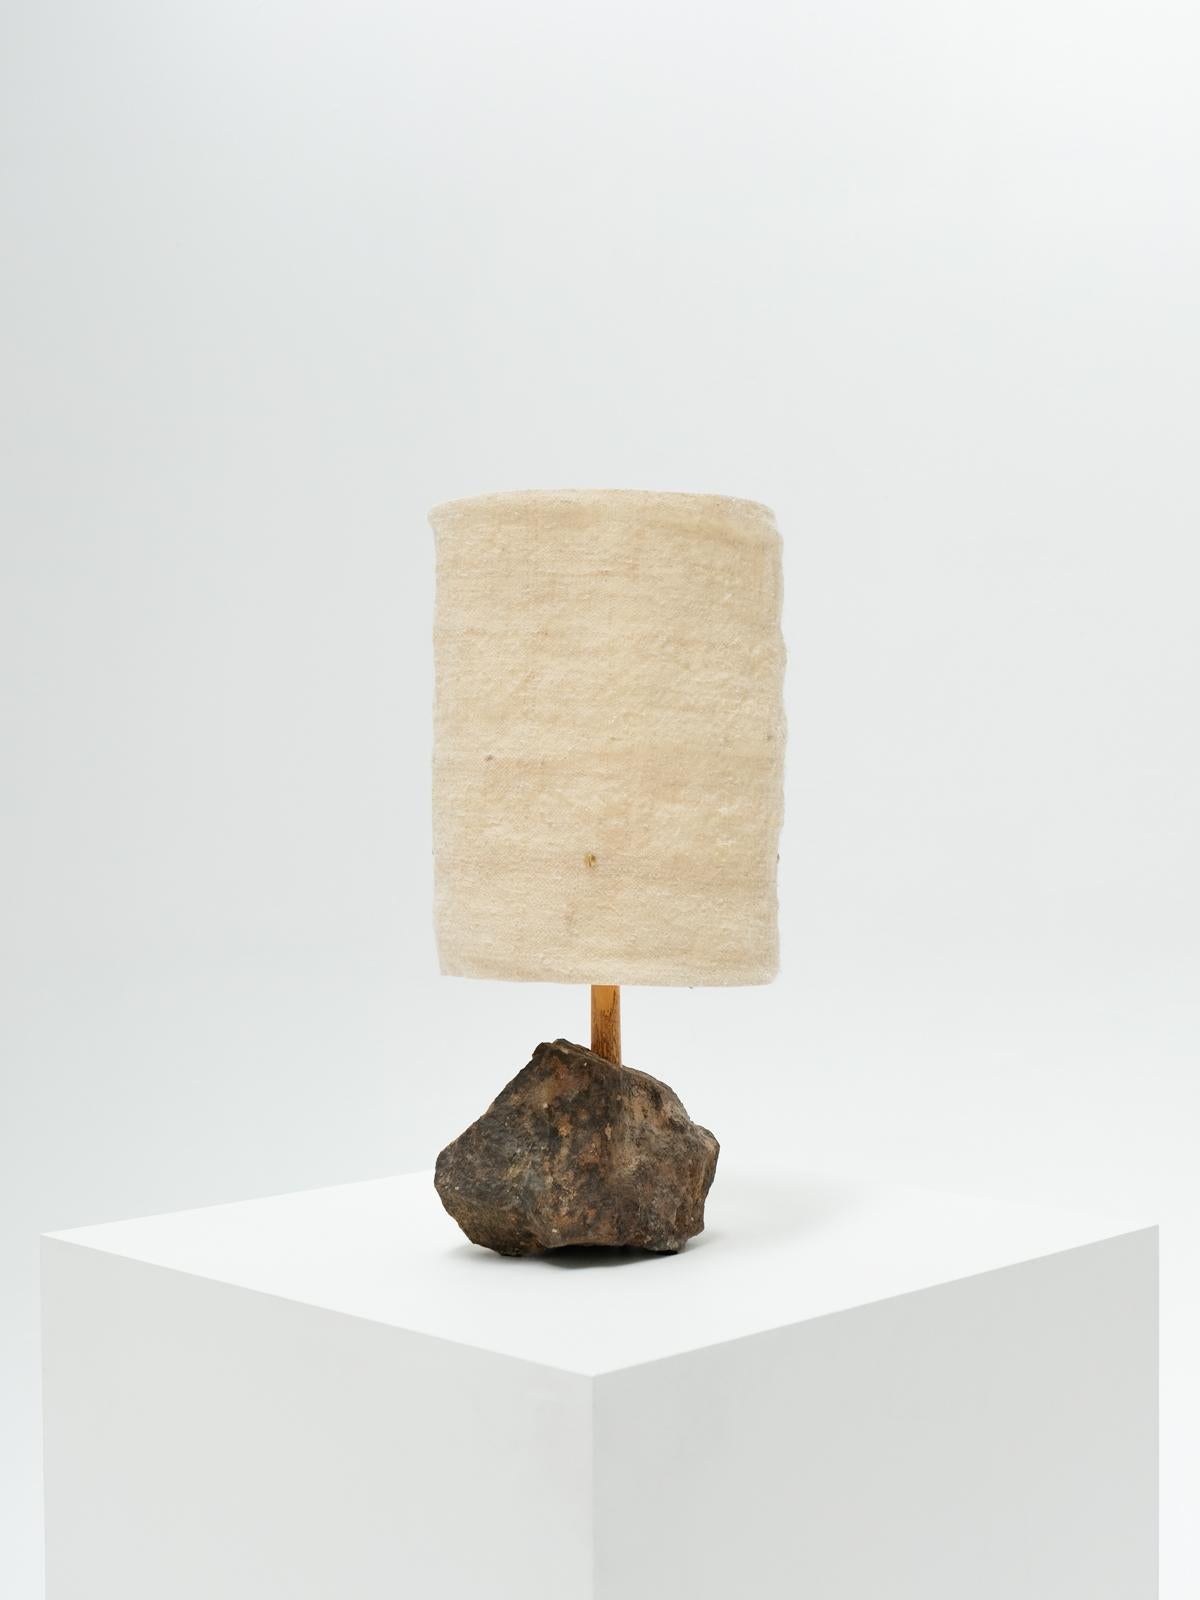 Hjra Table Lamp, Handspun and Handwoven wool lampshade, Made of Rock and Reed For Sale 7